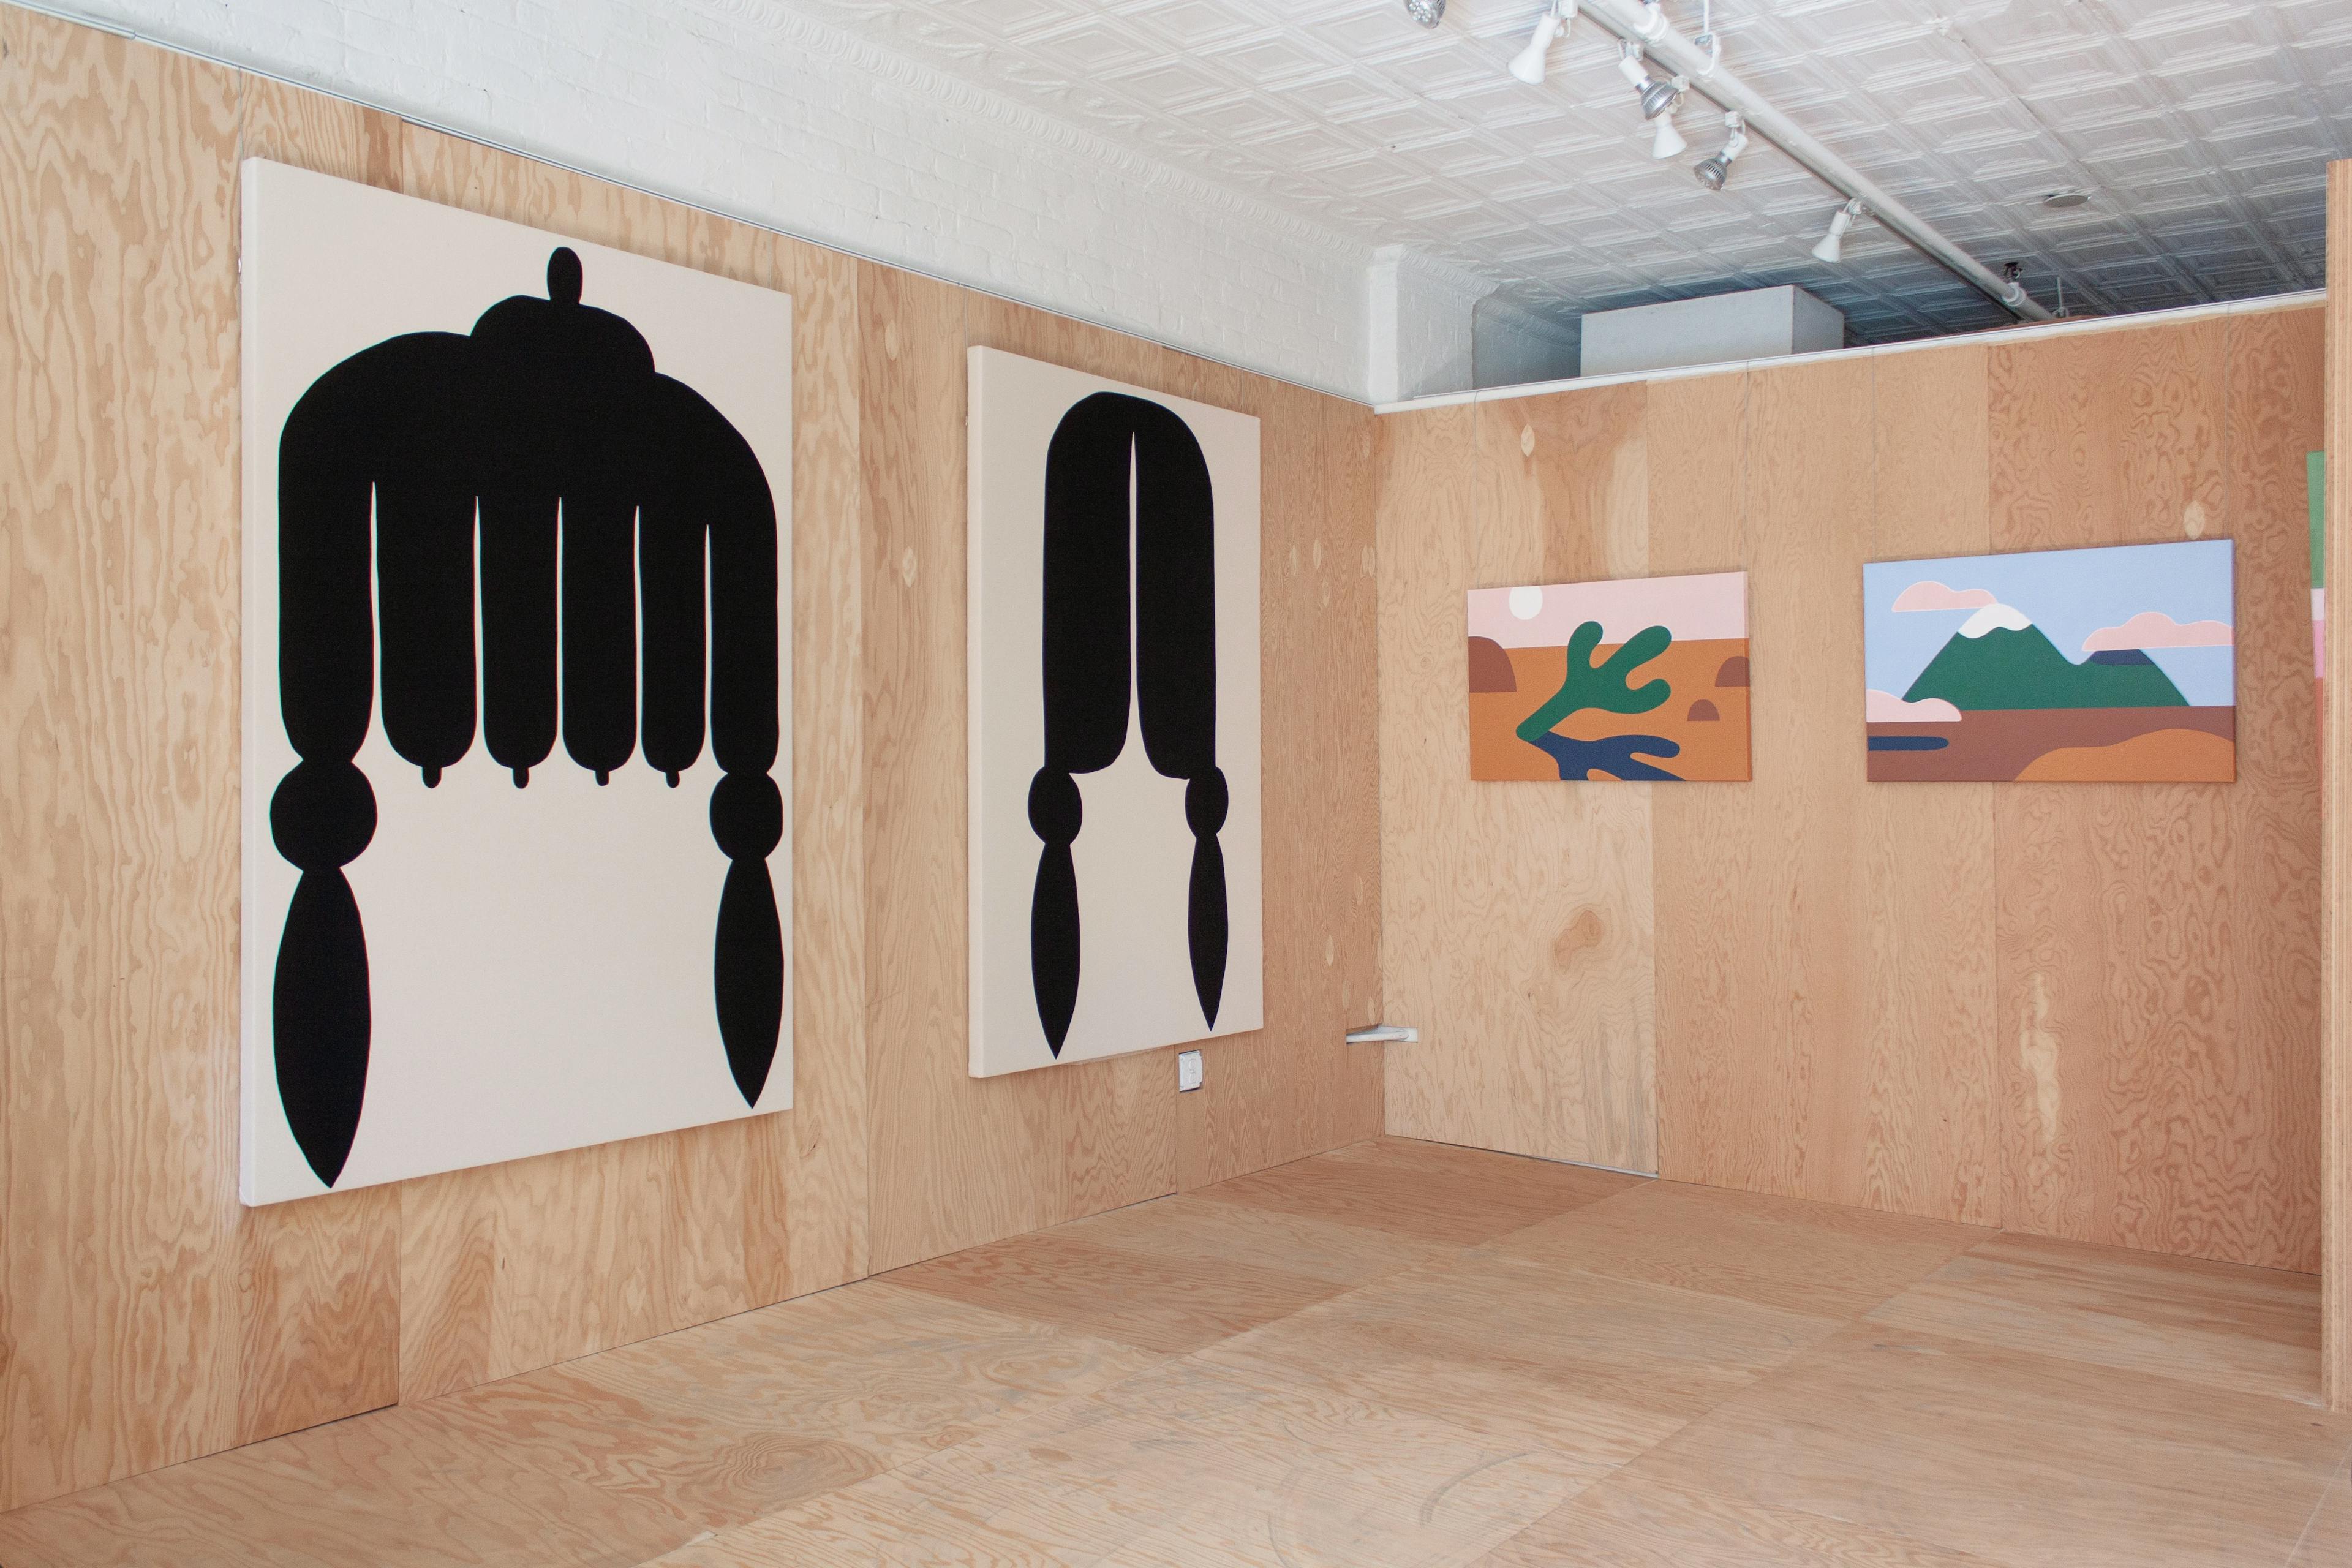 Artwork installed as part of Shapeshifter, one of Uprise Art's Exhibitions in New York, NY.